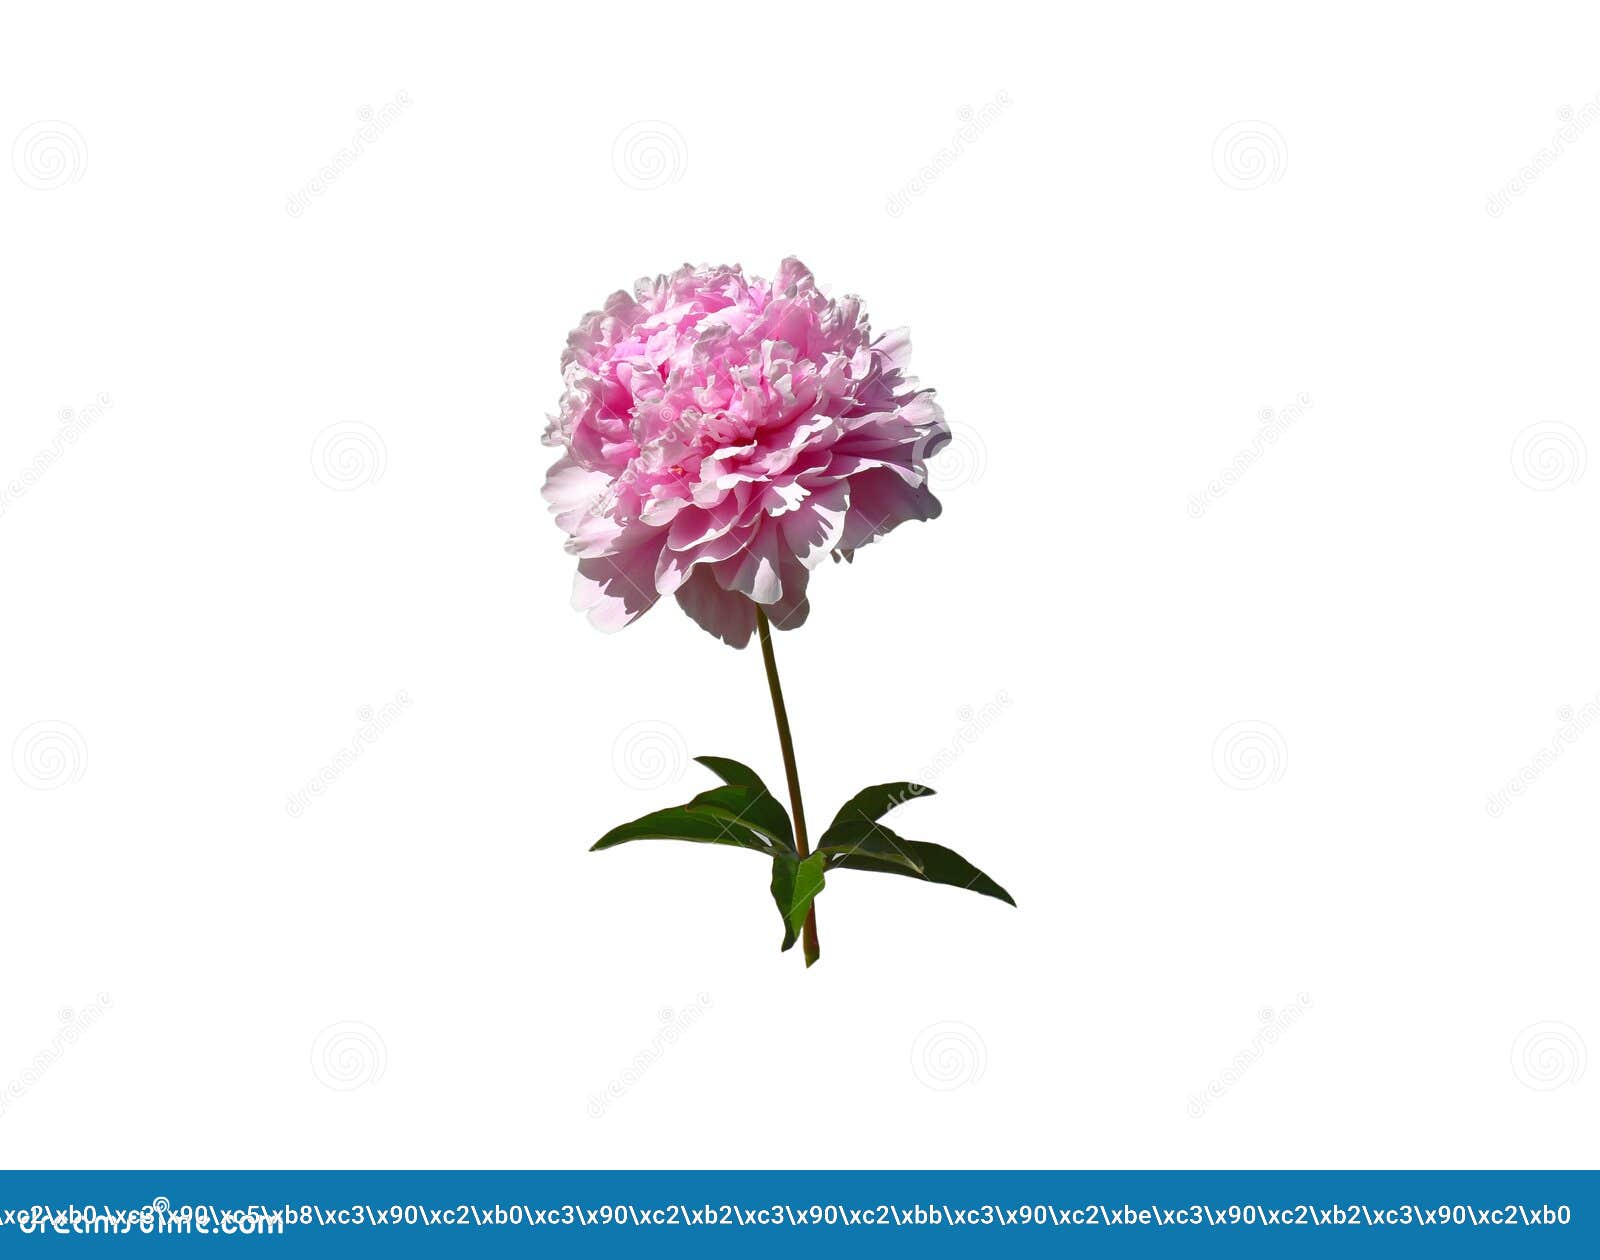 the peony flower is highlighted on a white background.